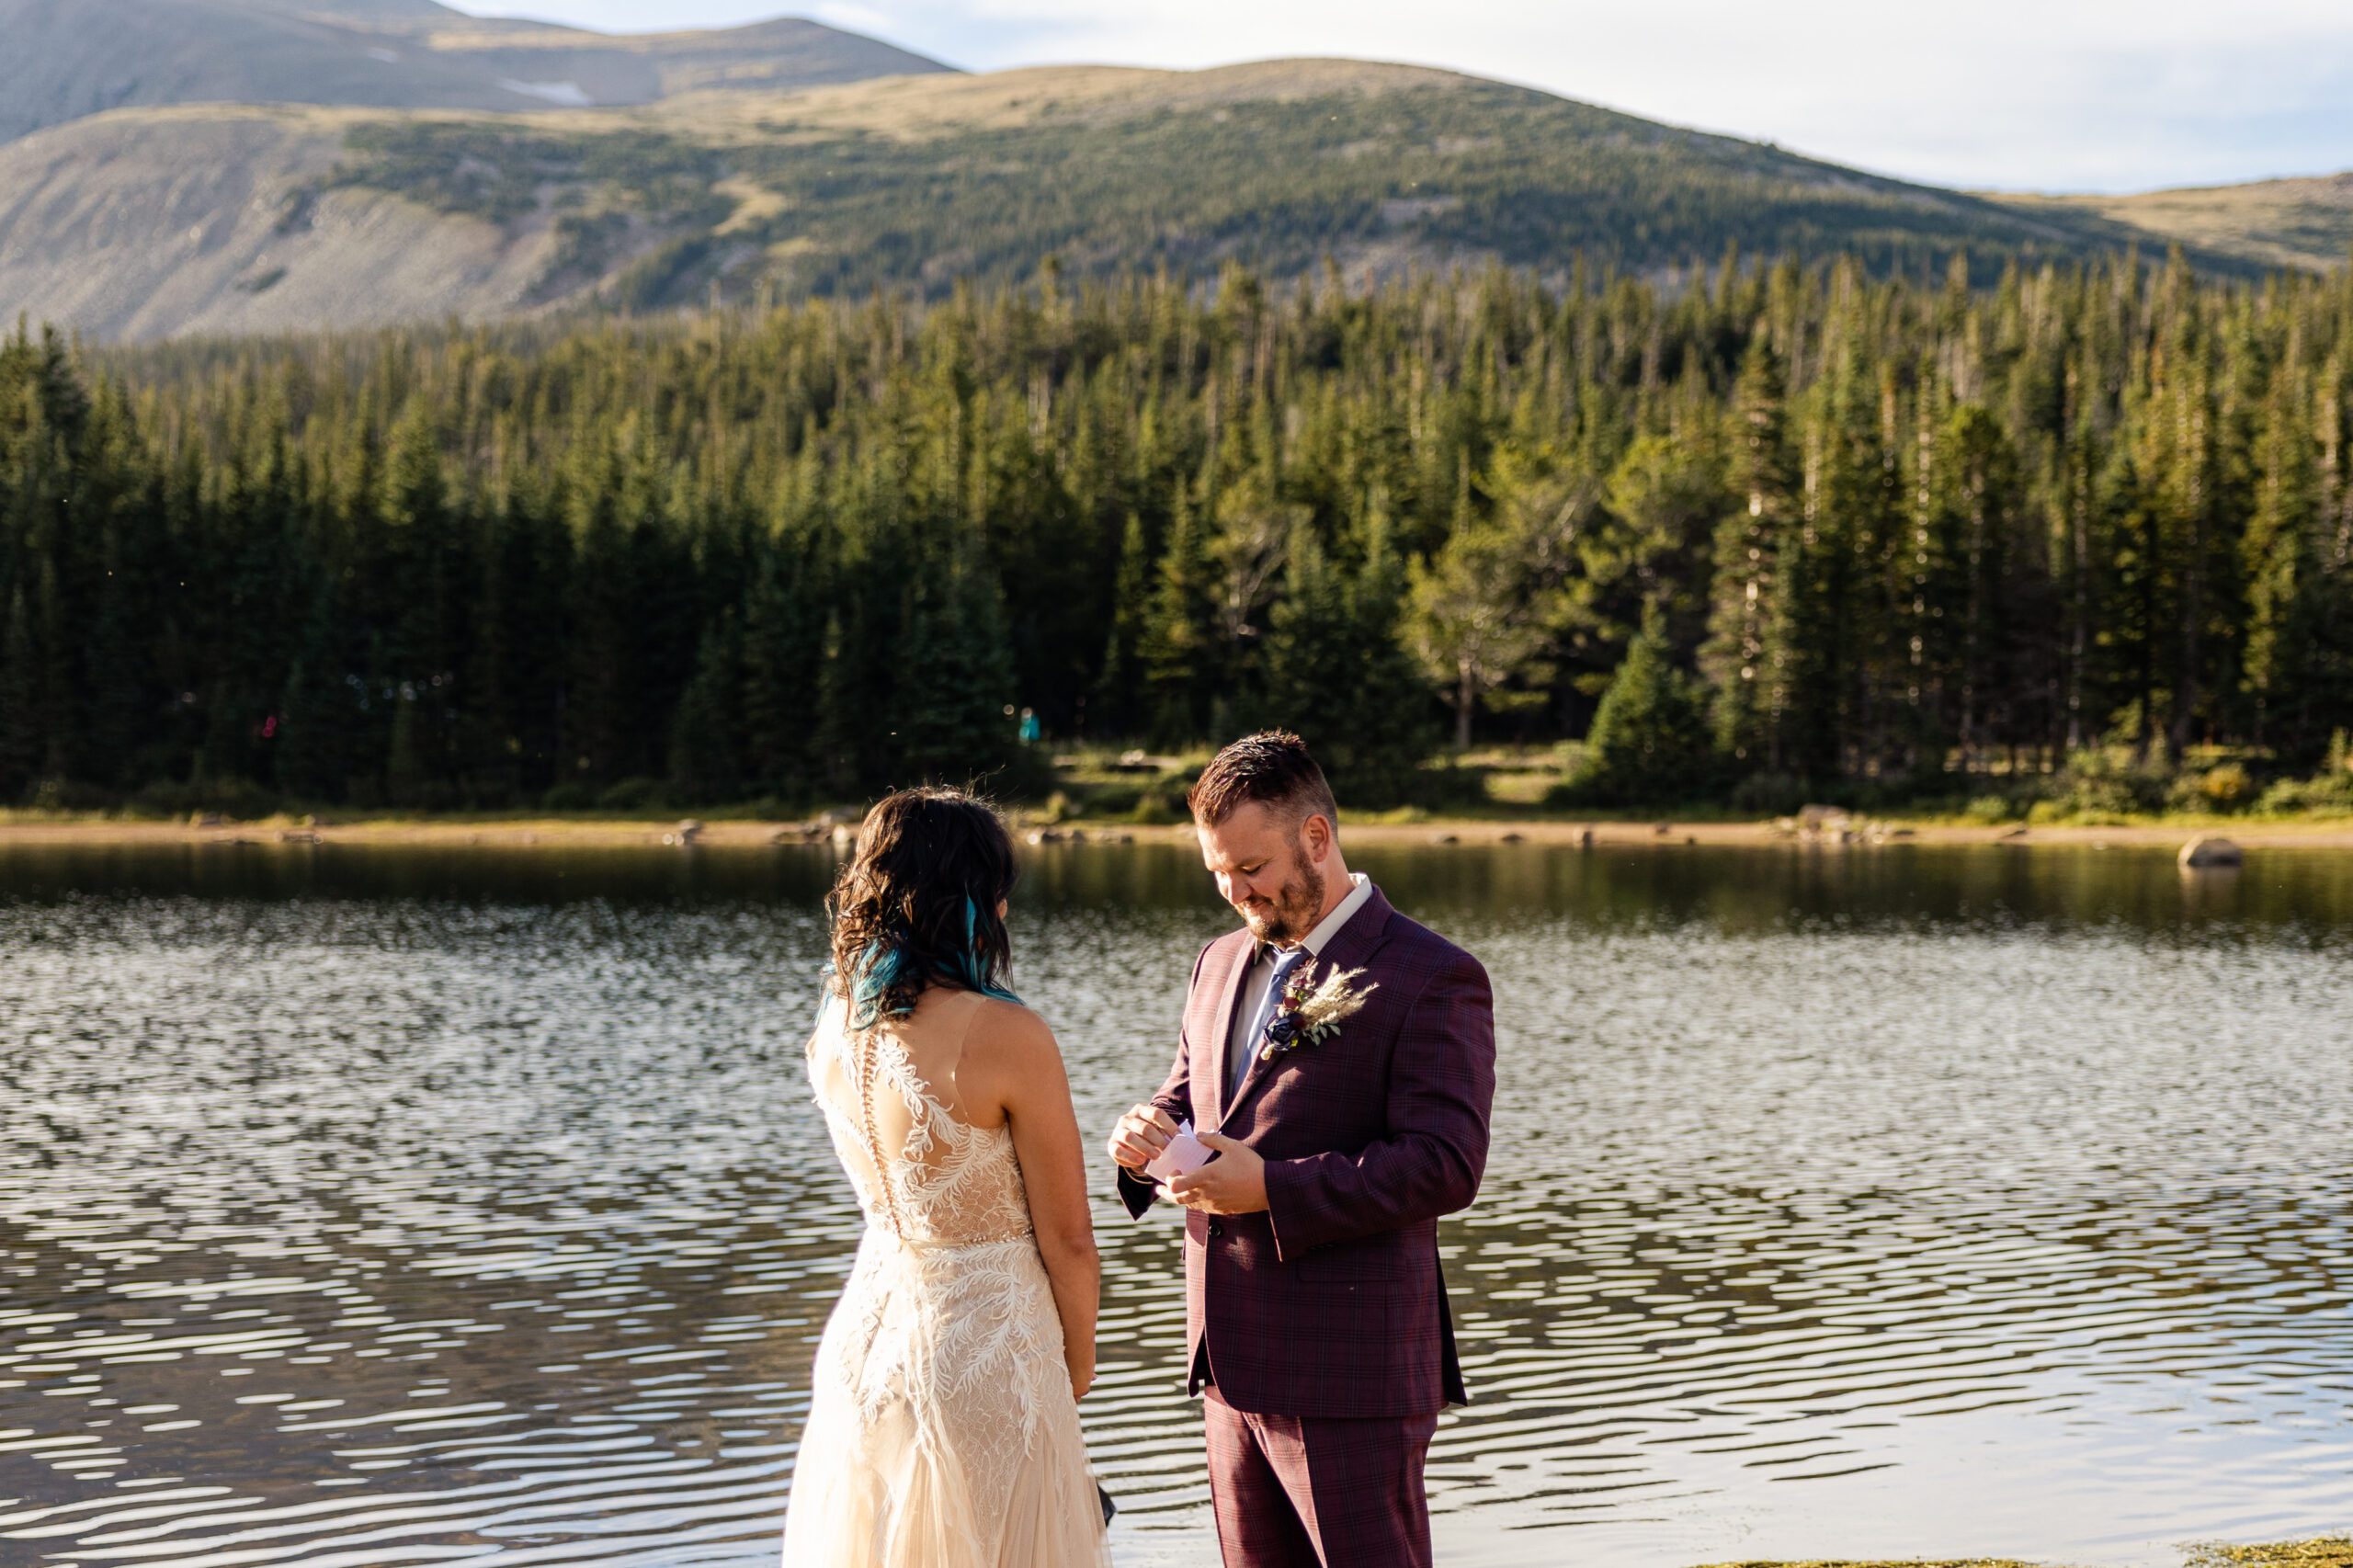 Groom pulls out his vows to read to his bride during their Brainard Lake Elopement.